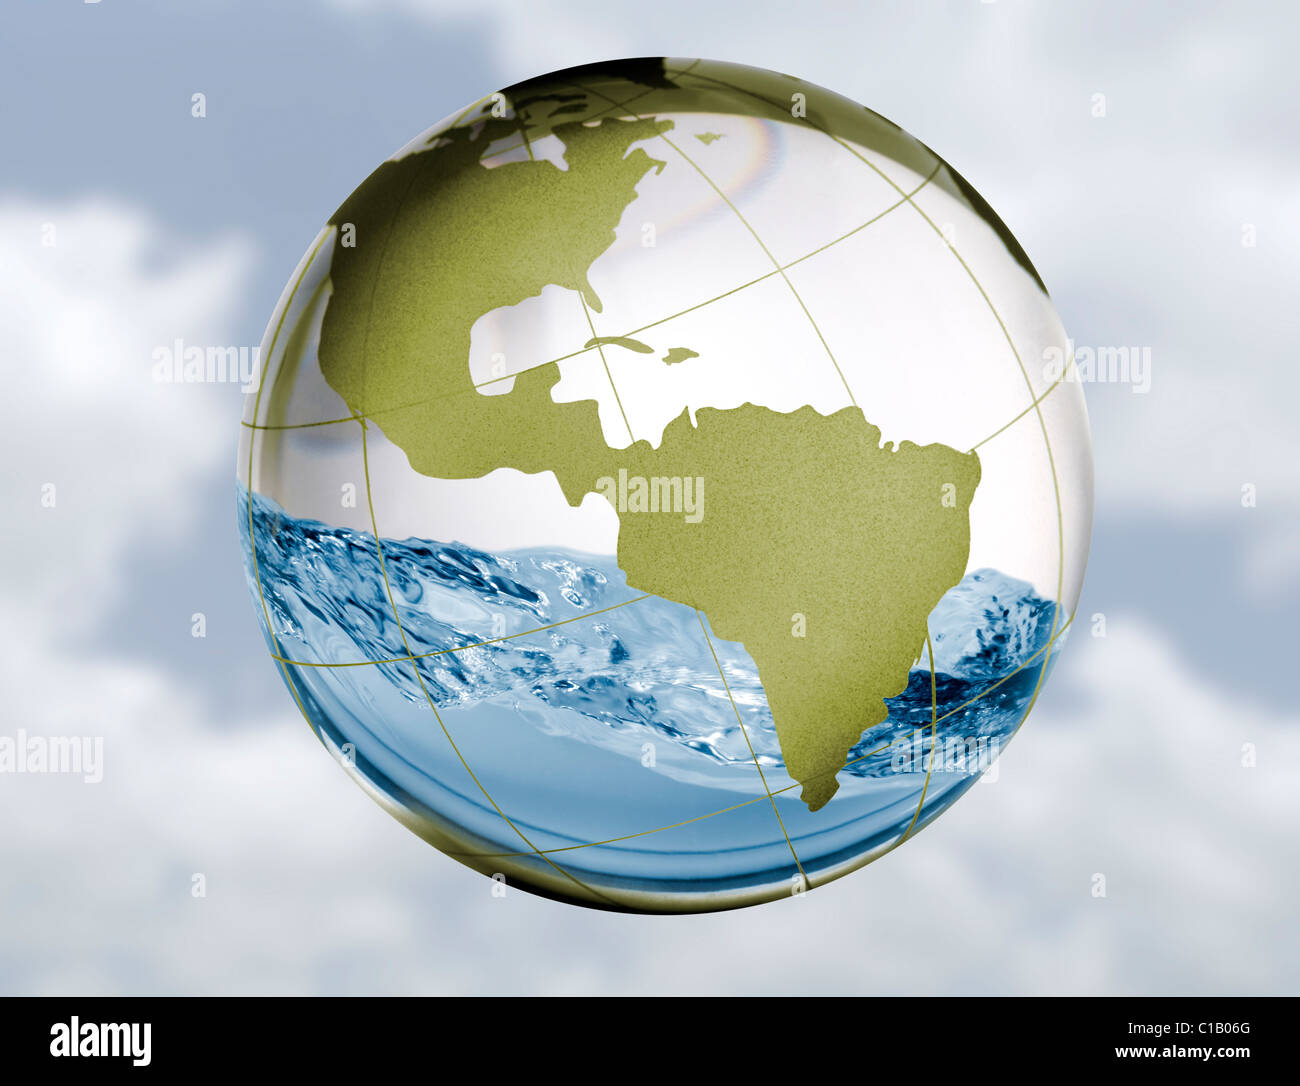 A glass globe with water sloshing around inside in a concept image for fresh water issues such as supply, drought, flooding, etc Stock Photo